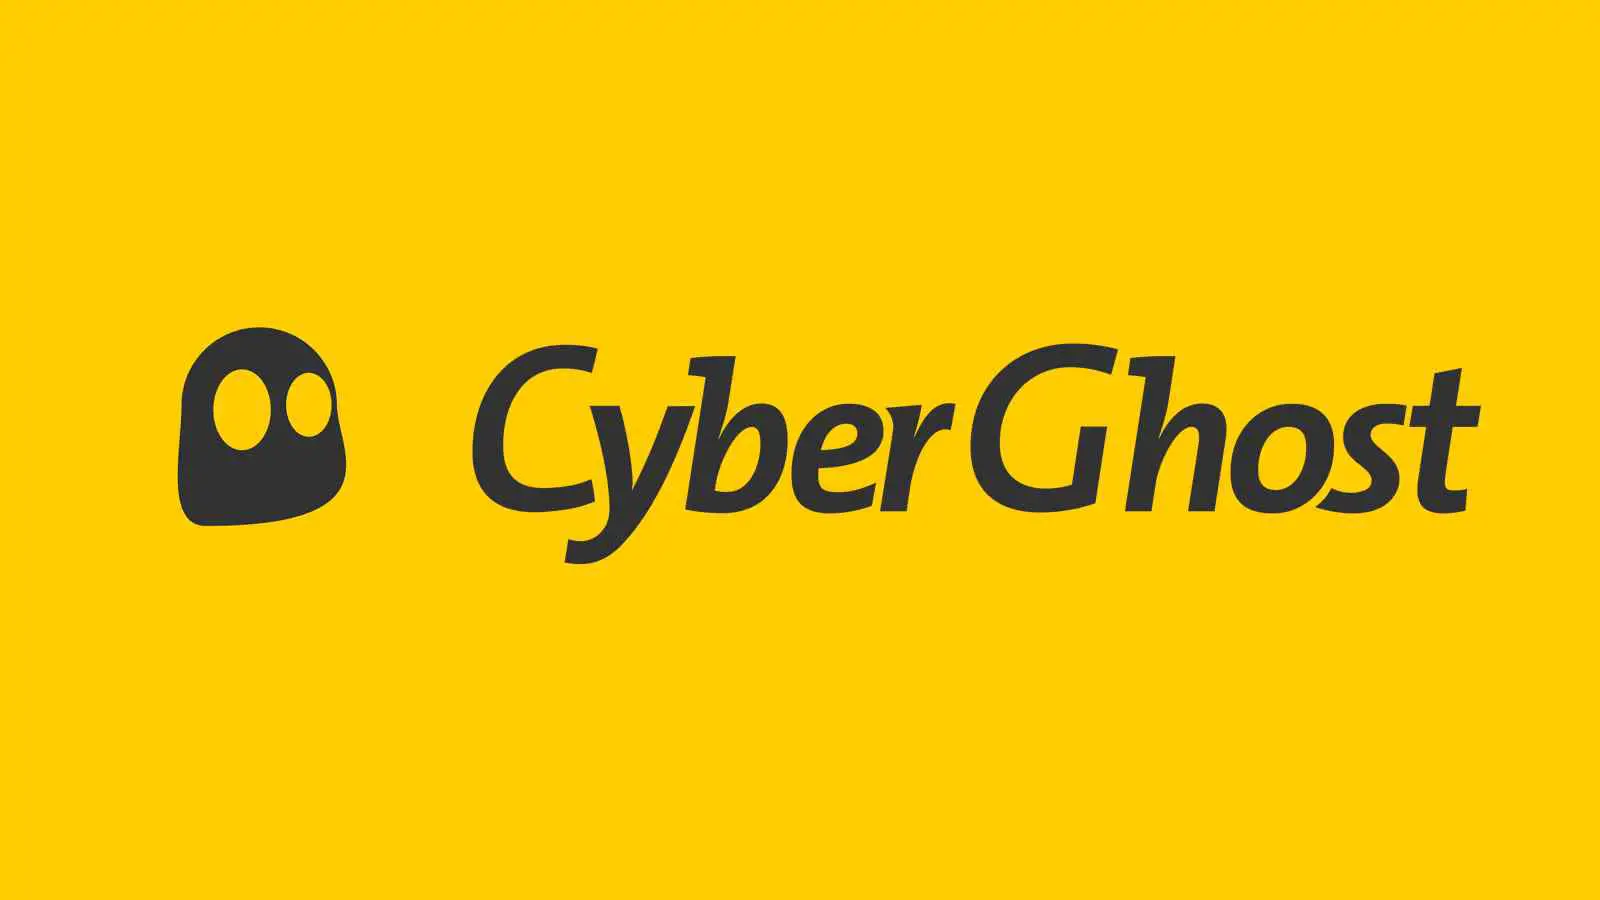 CyberGhost VPN is a well-known VPN service that gives its users strong security and privacy features.